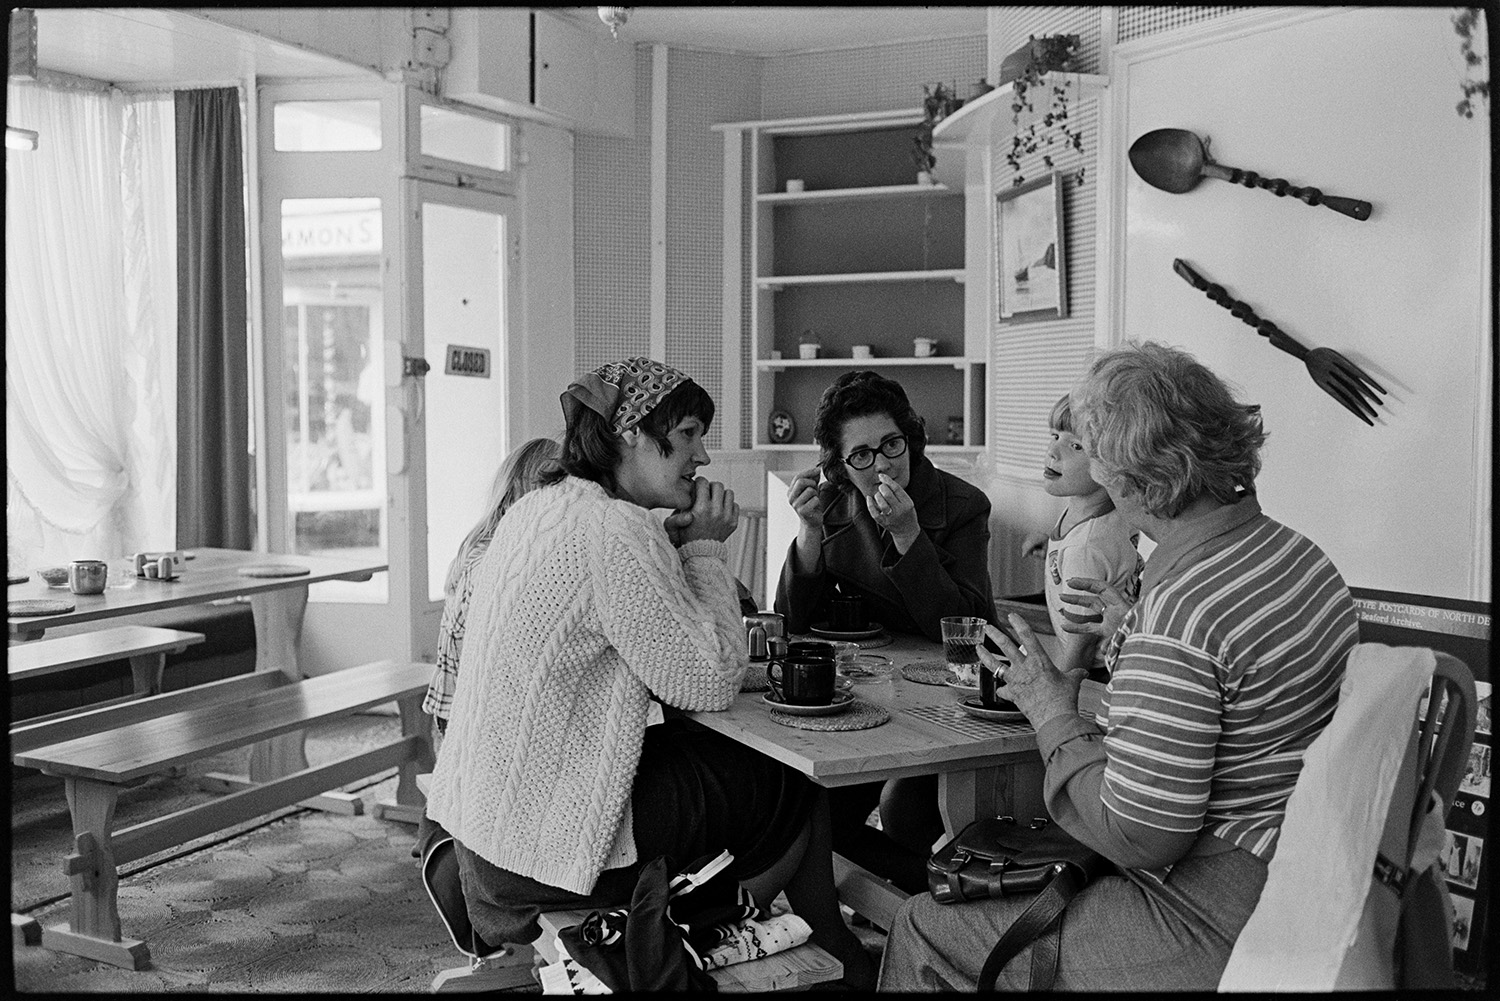 Customers in restaurant café. 
[A group of women and children having drinks in a café in South Molton. A bench table is behind them and a decorative spoon and fork are hanging on the wall.]